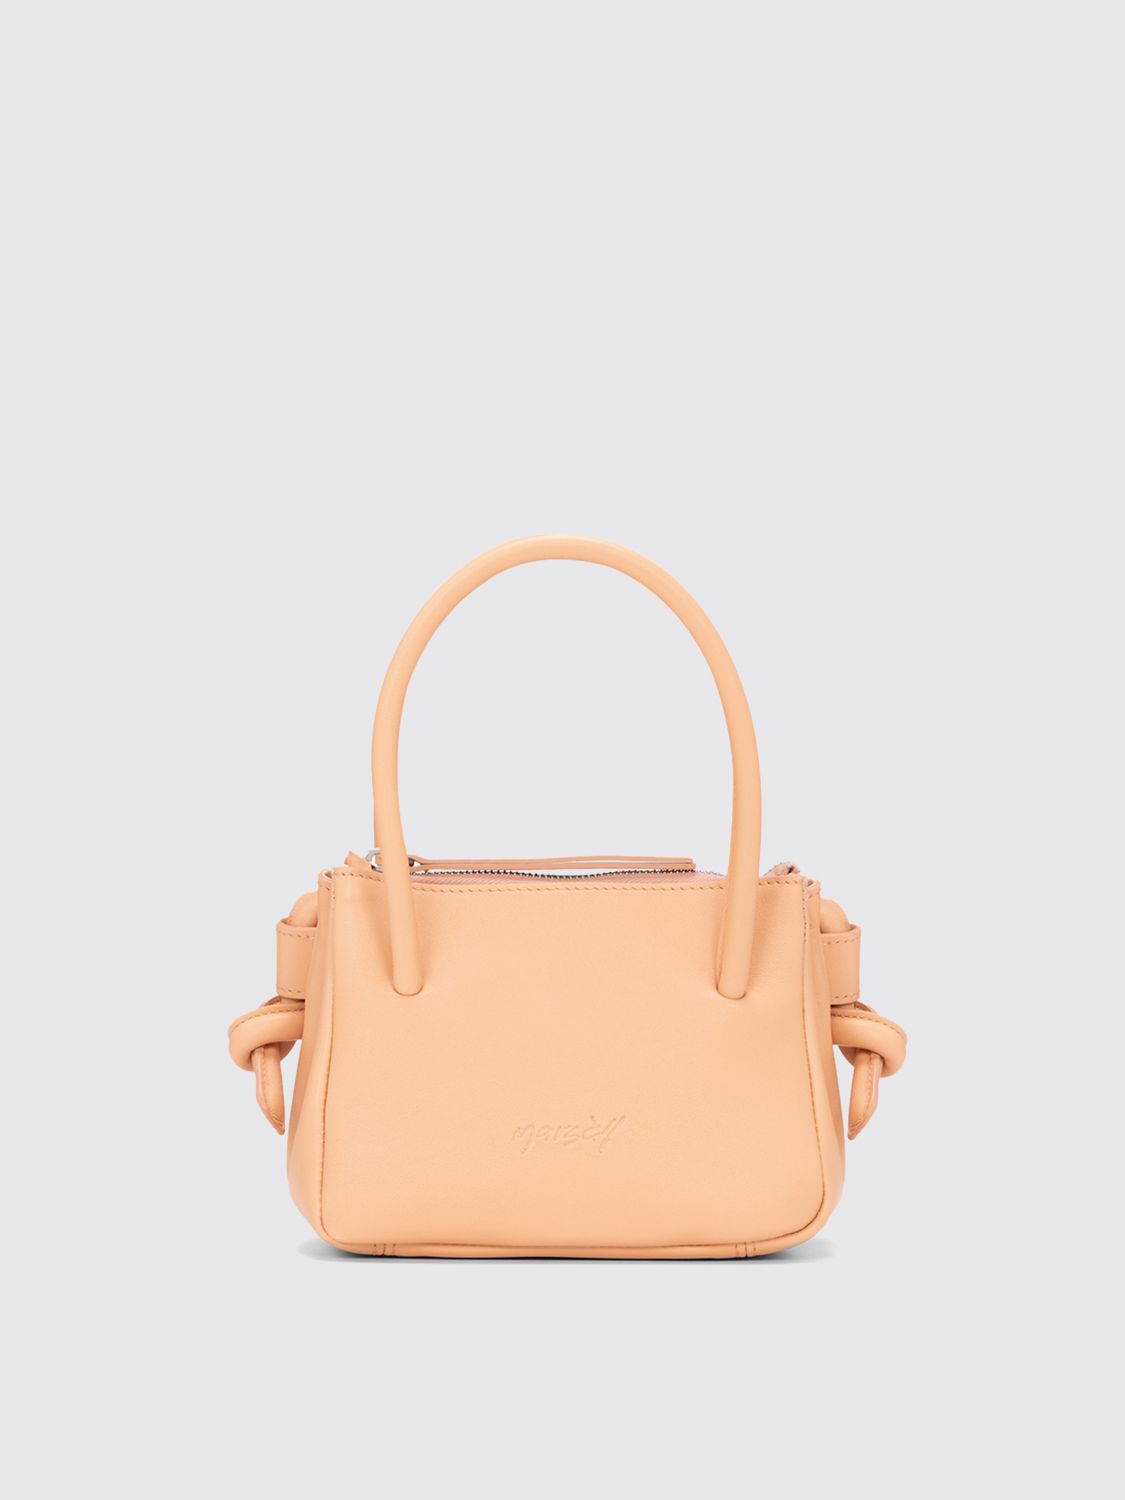 Marsèll Sacco Bag In Leather In Apricot